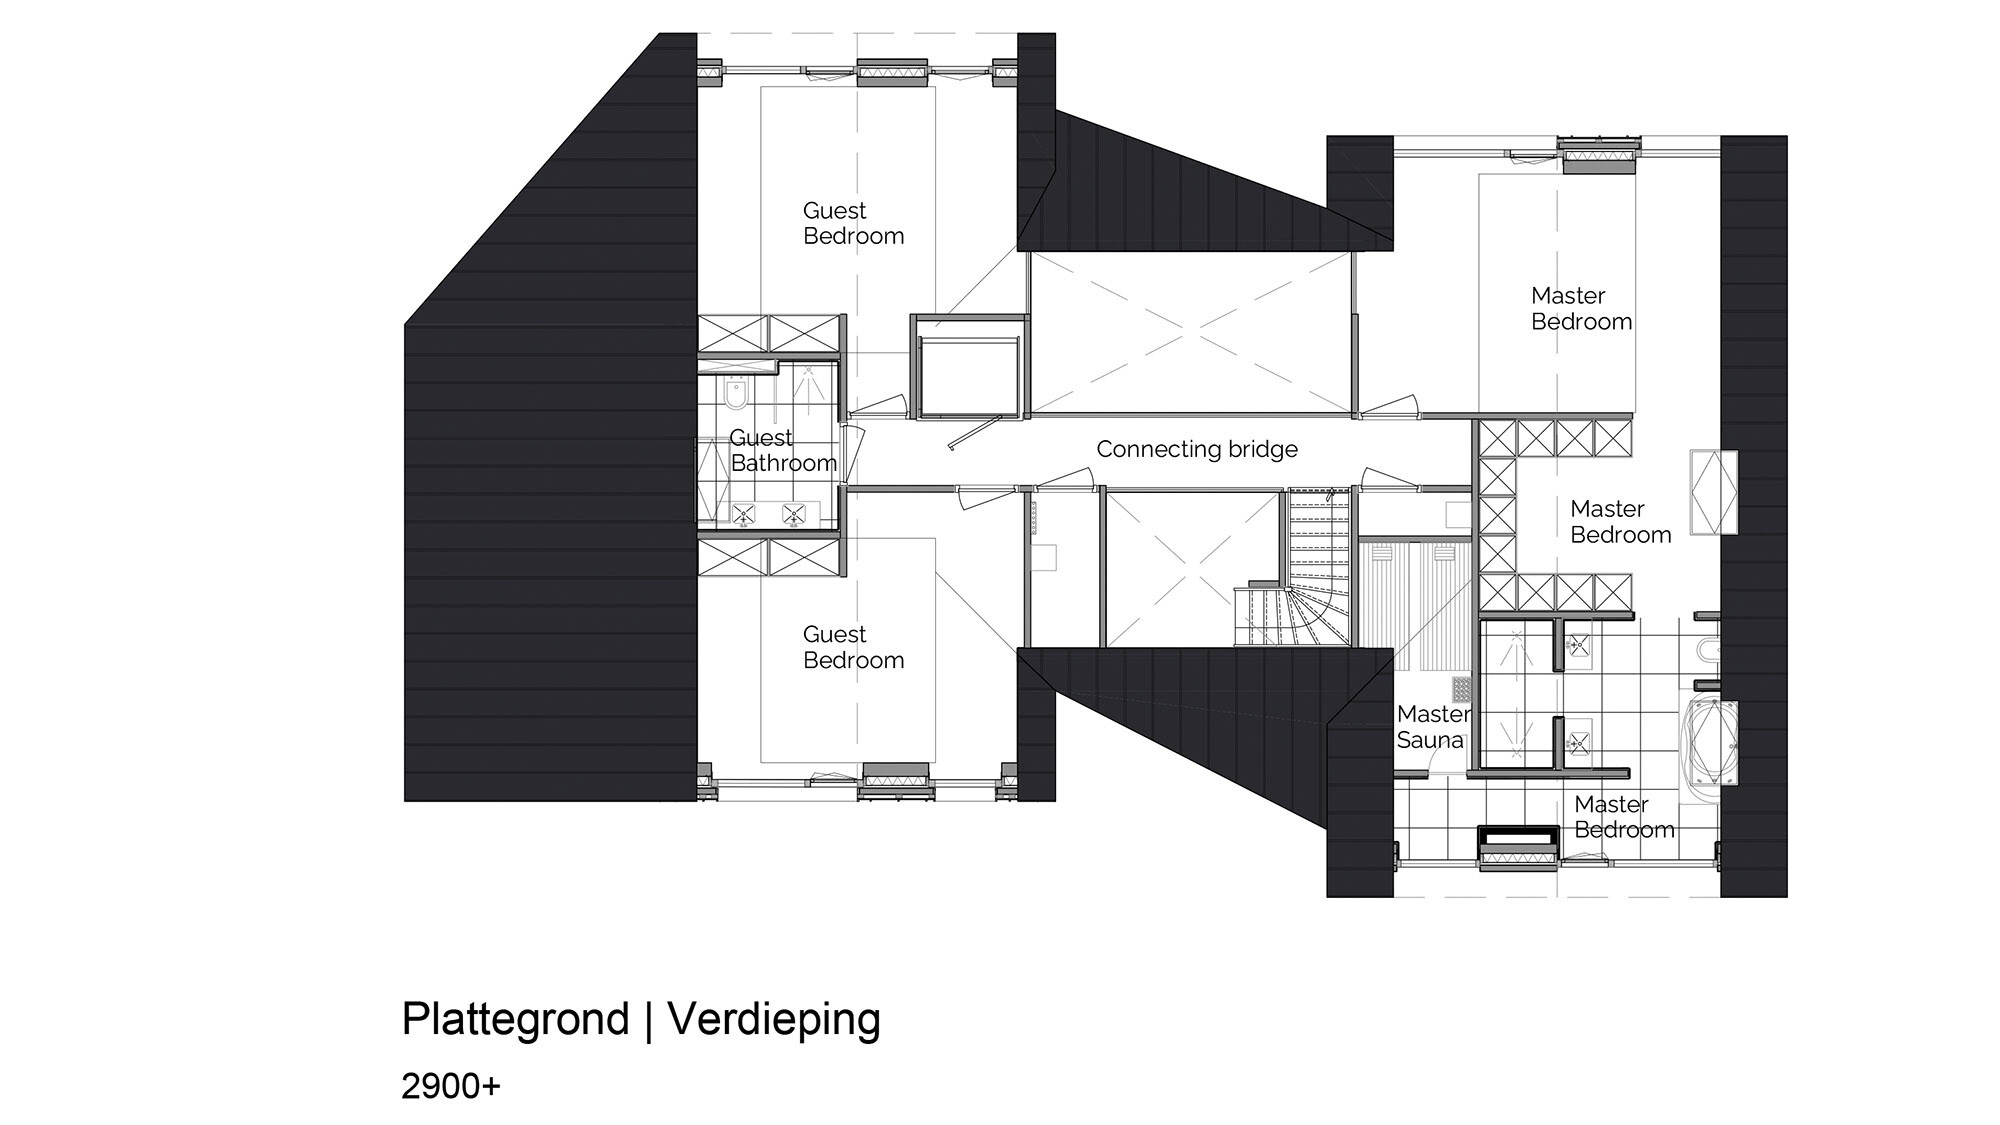 Floor plan of the first floor of a modern detached house. The plan shows two guest rooms with an associated bathroom on the left, connected by a bridge to a large master bedroom on the right, which also includes a sauna. The floor plan is in black and white colour scheme, detailed and drawn to scale with clear labelling of the rooms.